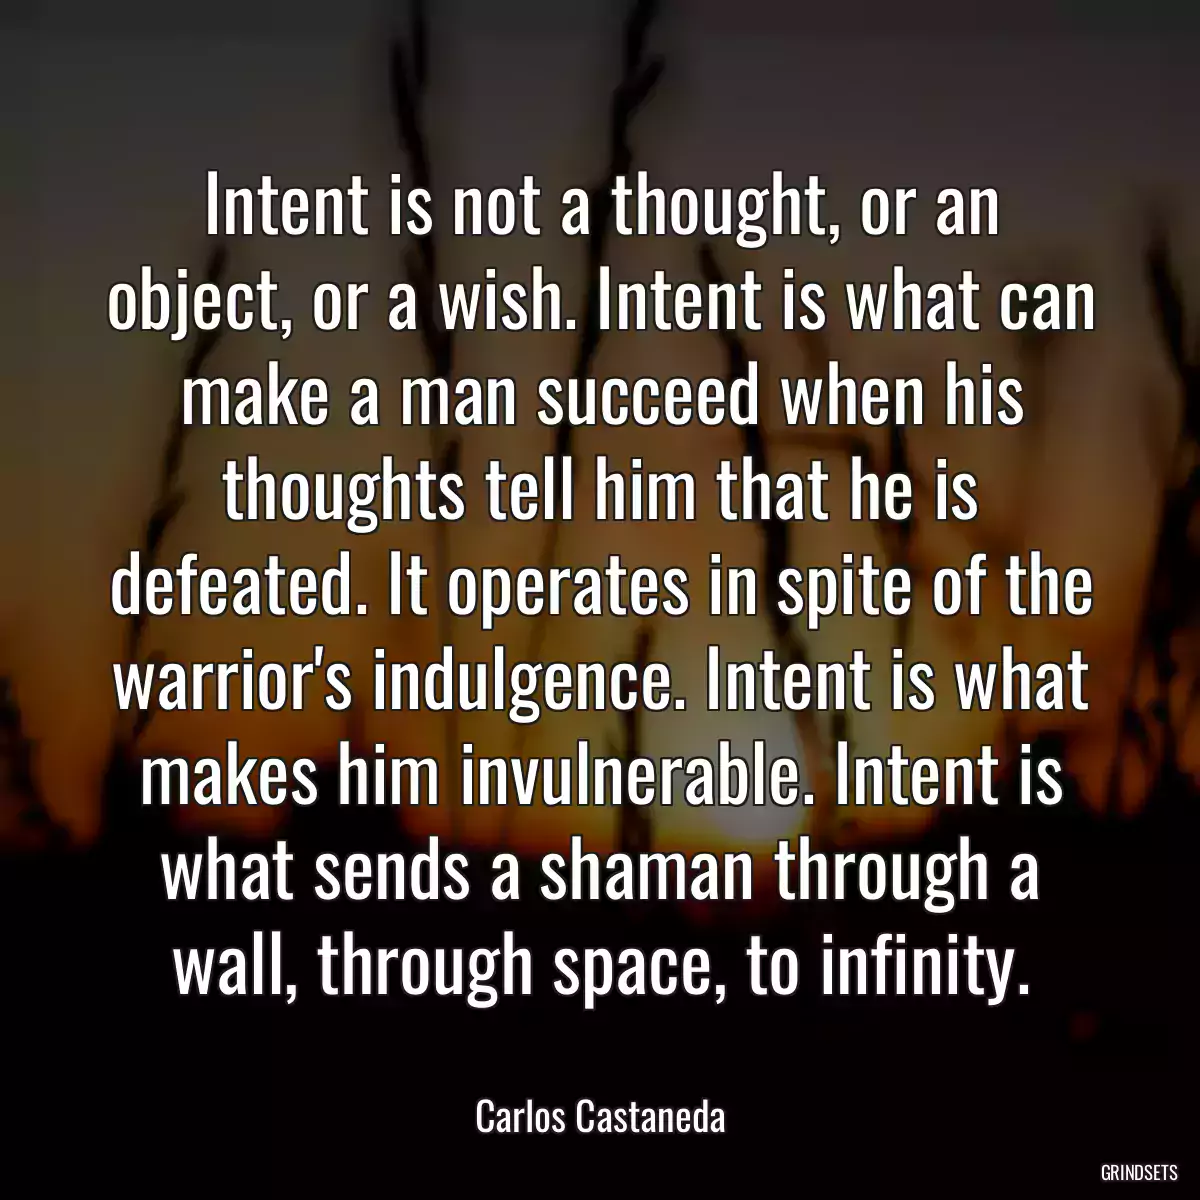 Intent is not a thought, or an object, or a wish. Intent is what can make a man succeed when his thoughts tell him that he is defeated. It operates in spite of the warrior\'s indulgence. Intent is what makes him invulnerable. Intent is what sends a shaman through a wall, through space, to infinity.